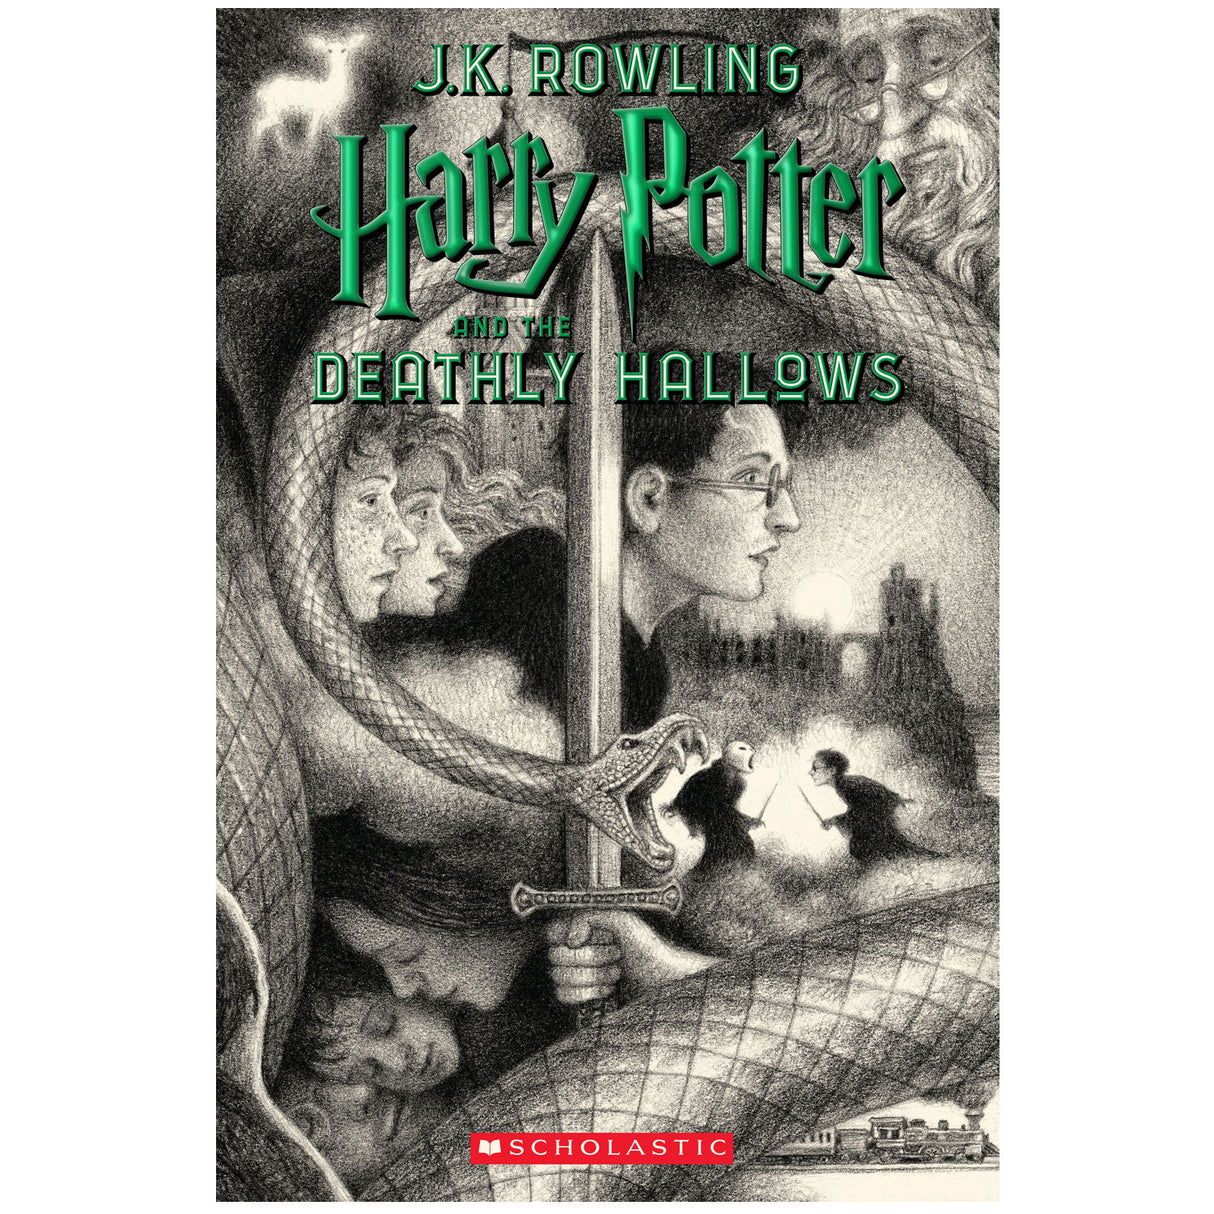 Harry Potter and the Deathly Hallows 20th Anniversary Edition